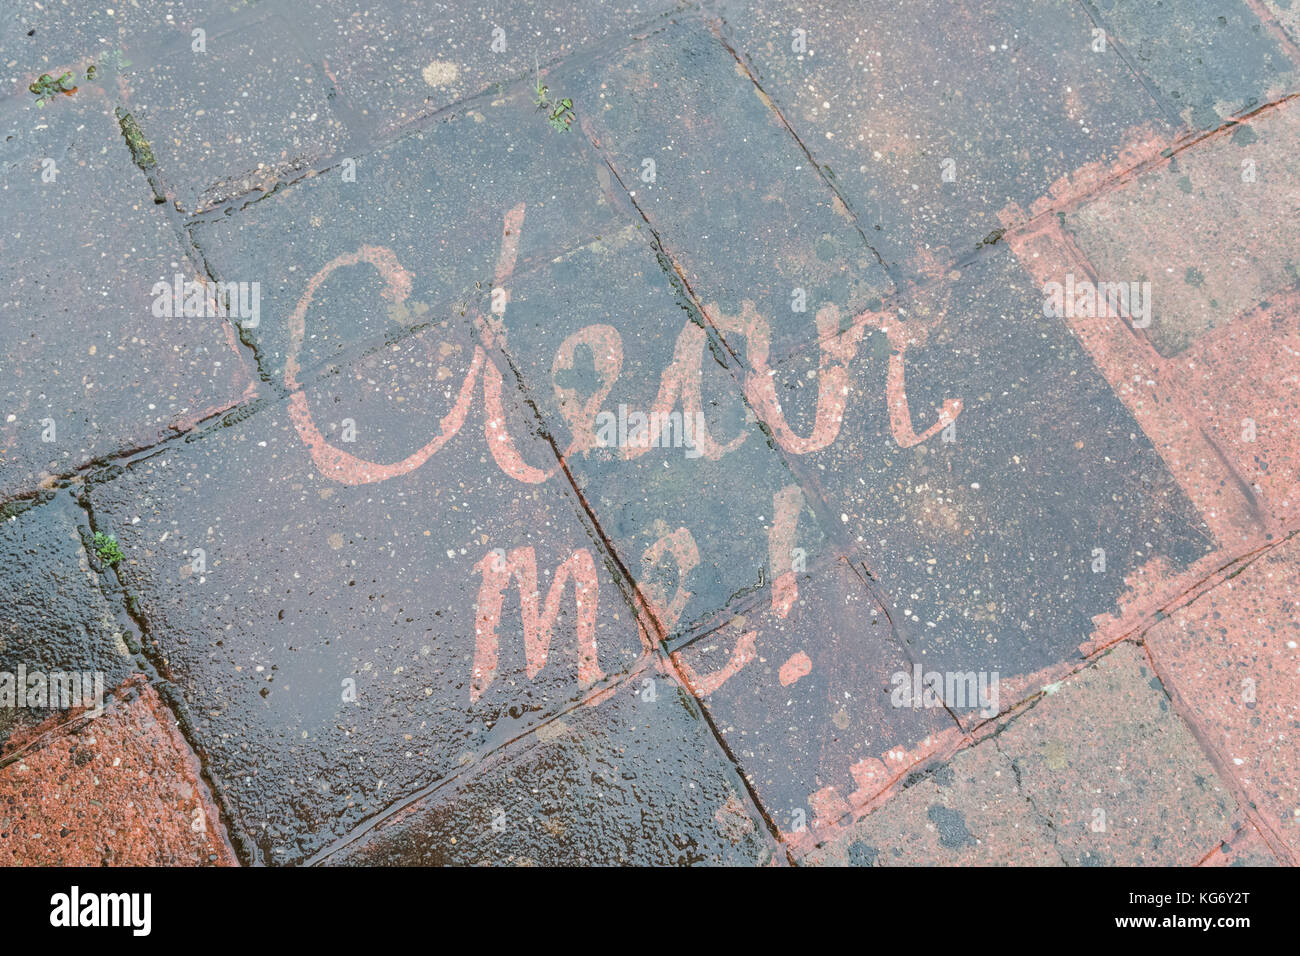 'clean me' written by pressure washer on dirty patio Stock Photo